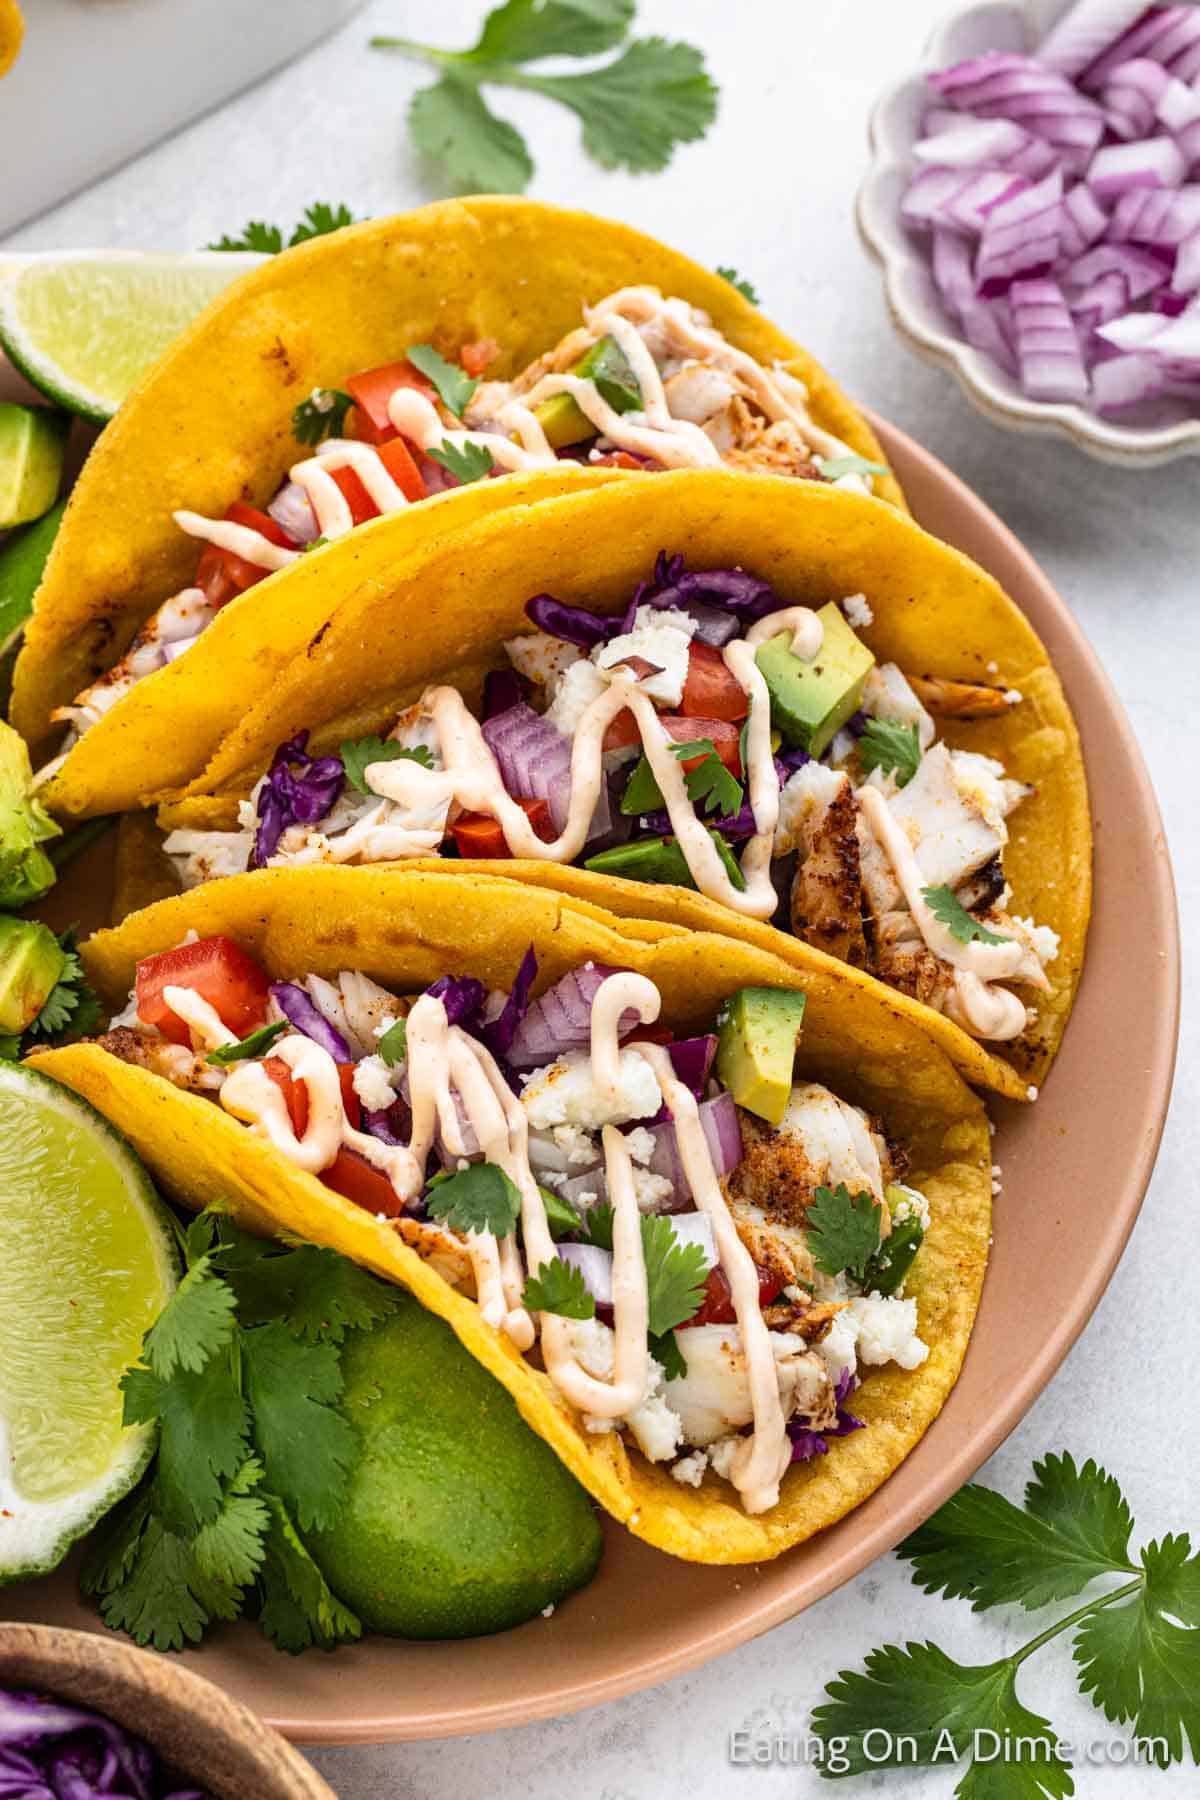 Three fish tacos filled with flaked white fish, shredded red cabbage, diced tomatoes, sliced avocado, cilantro, and topped with a drizzle of creamy sauce. This easy fish tacos recipe is served on a pink plate with lime wedges, avocado halves, and cilantro on the side. Red onion is in a bowl nearby.